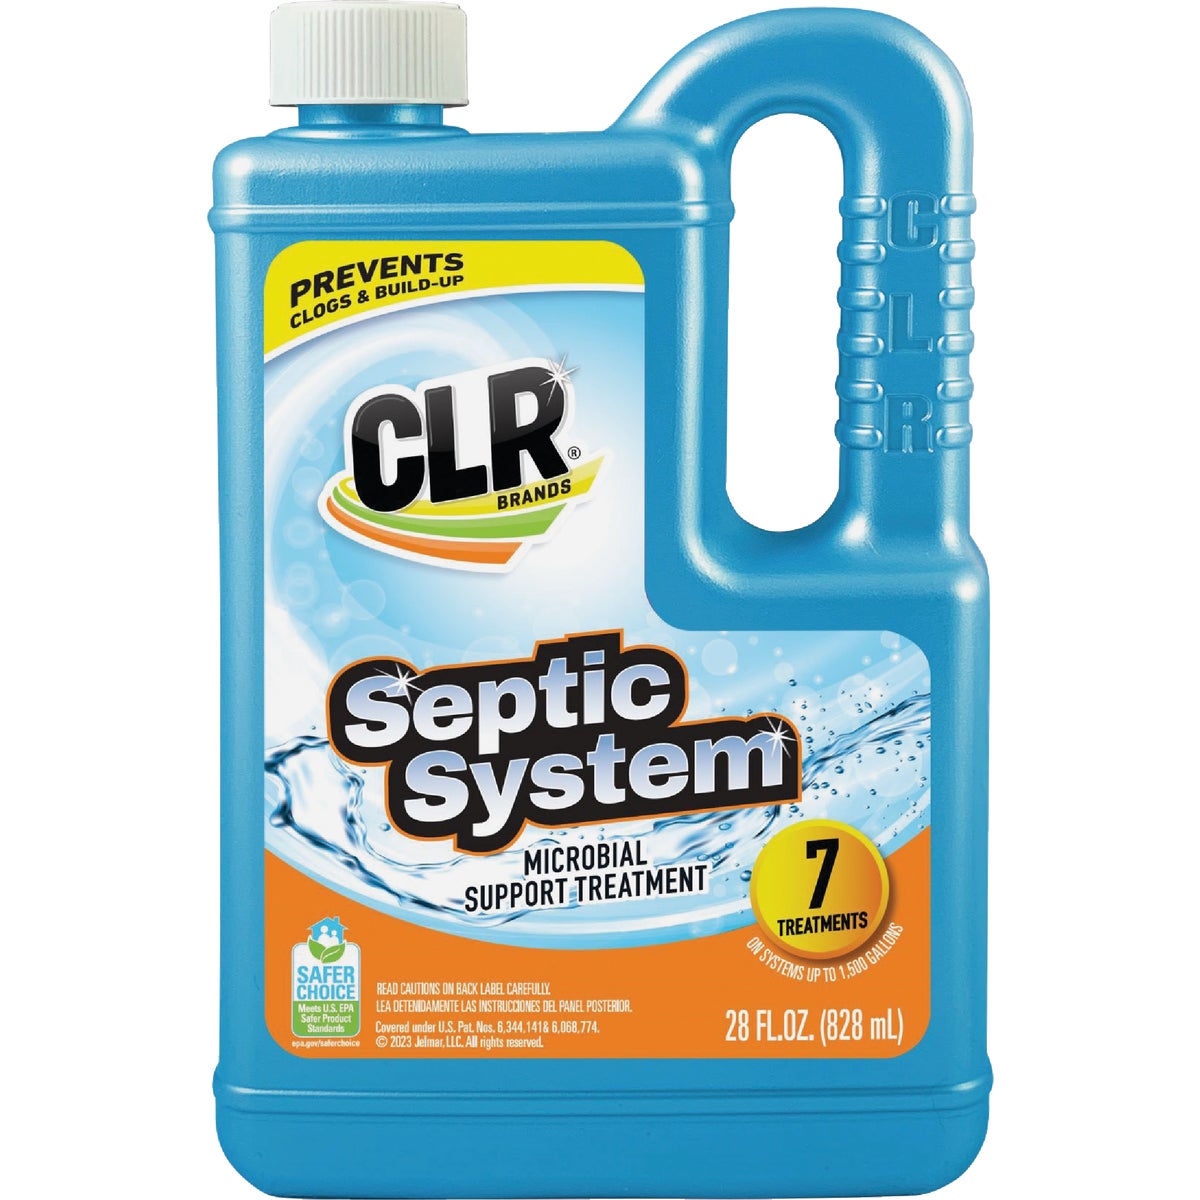 Item 449072, CLR Healthy Septic System microbial support treatment and drain care.